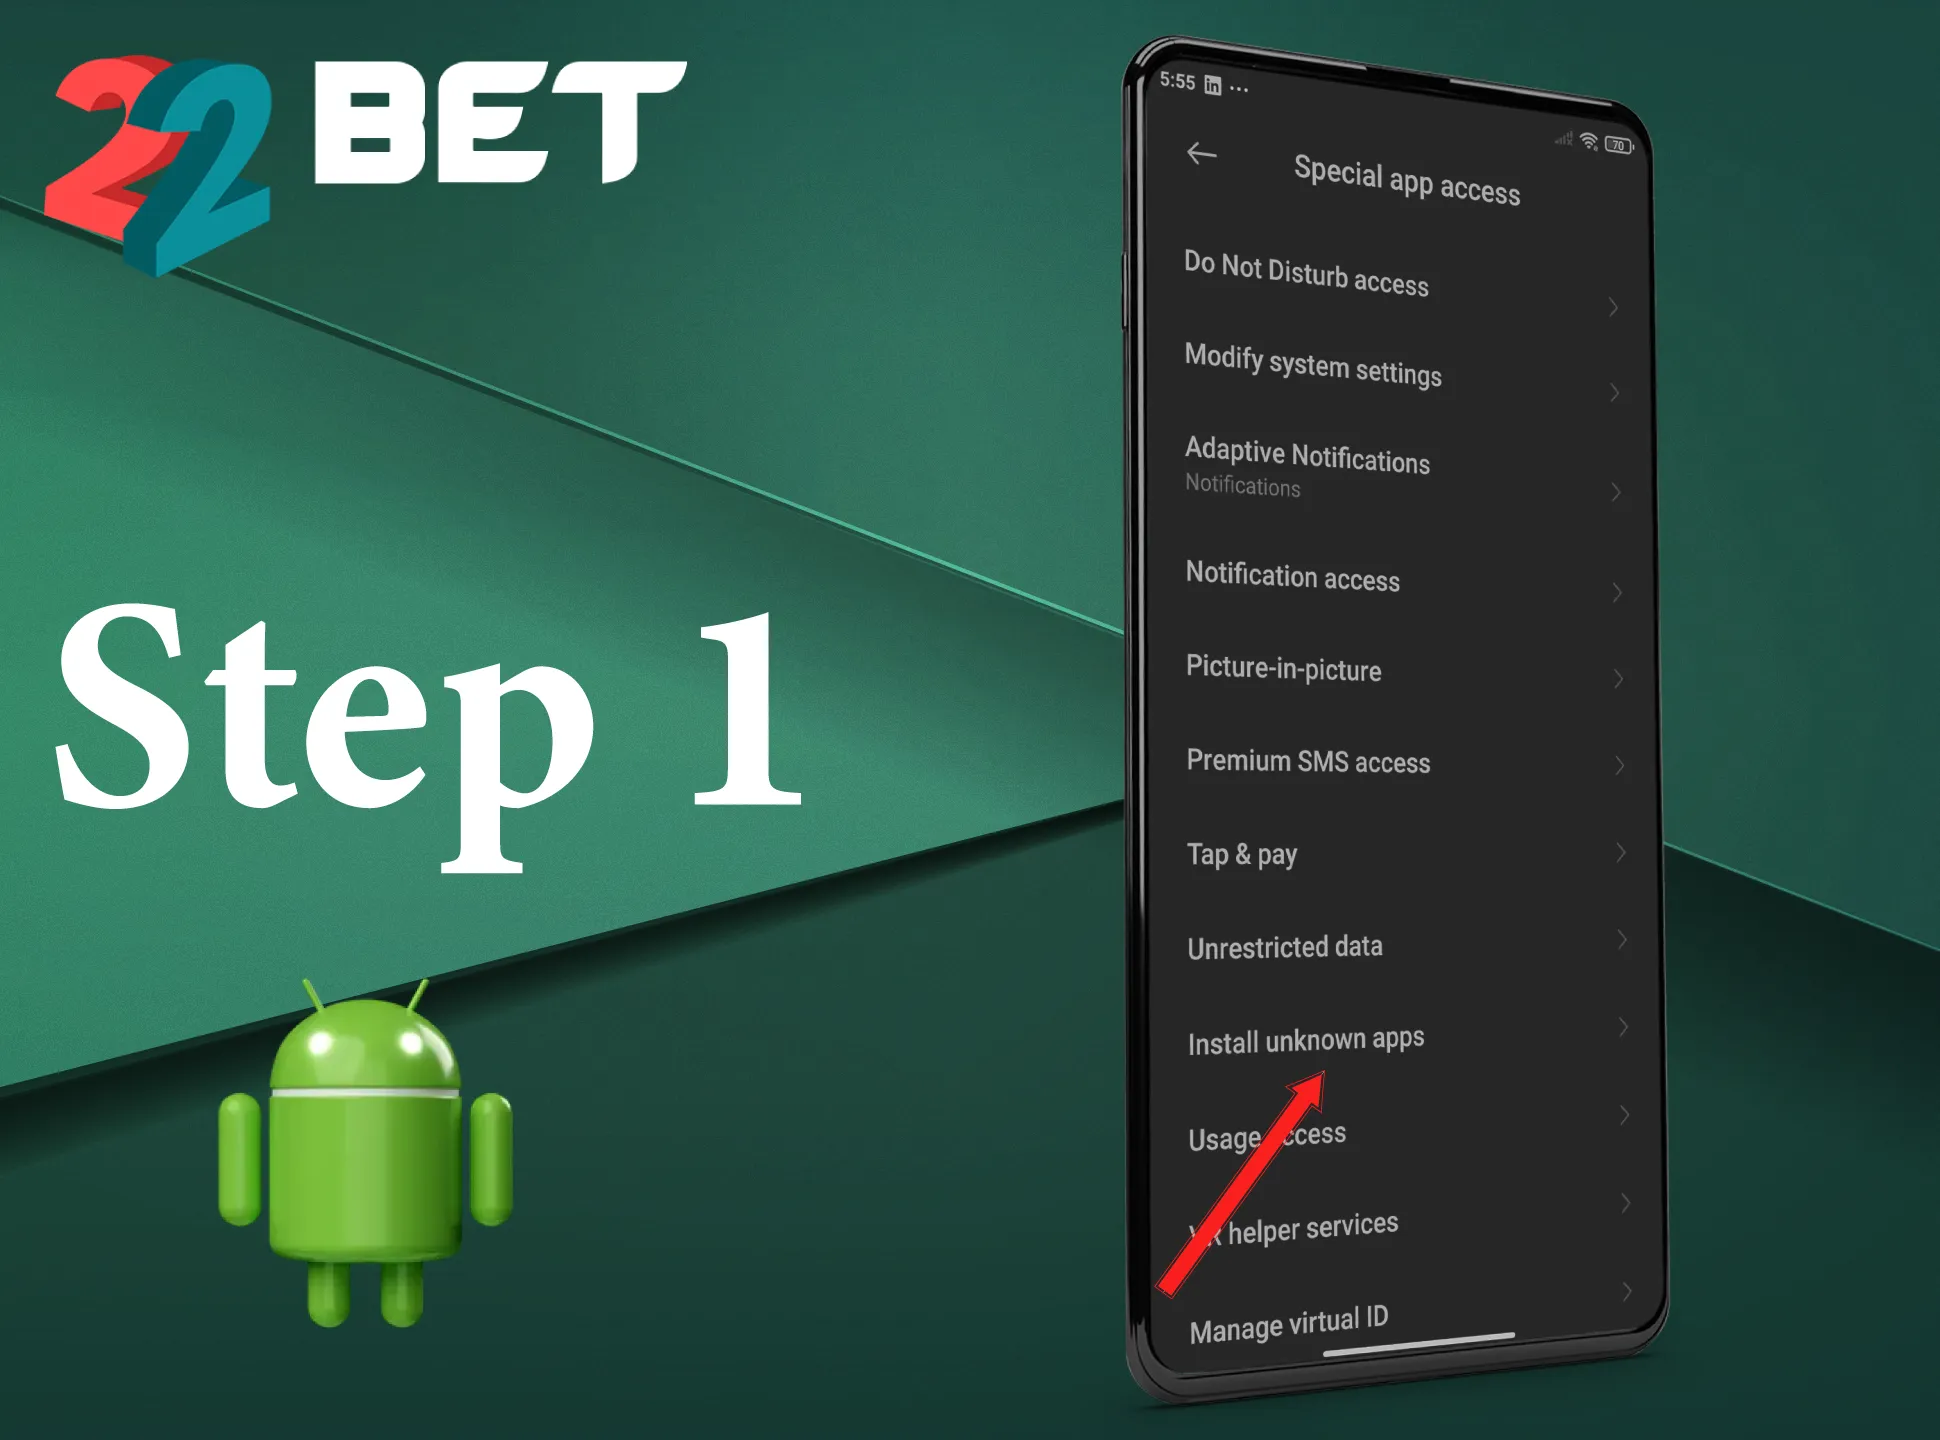 To install 22Bet app you need to allow installation from Unknown sources.